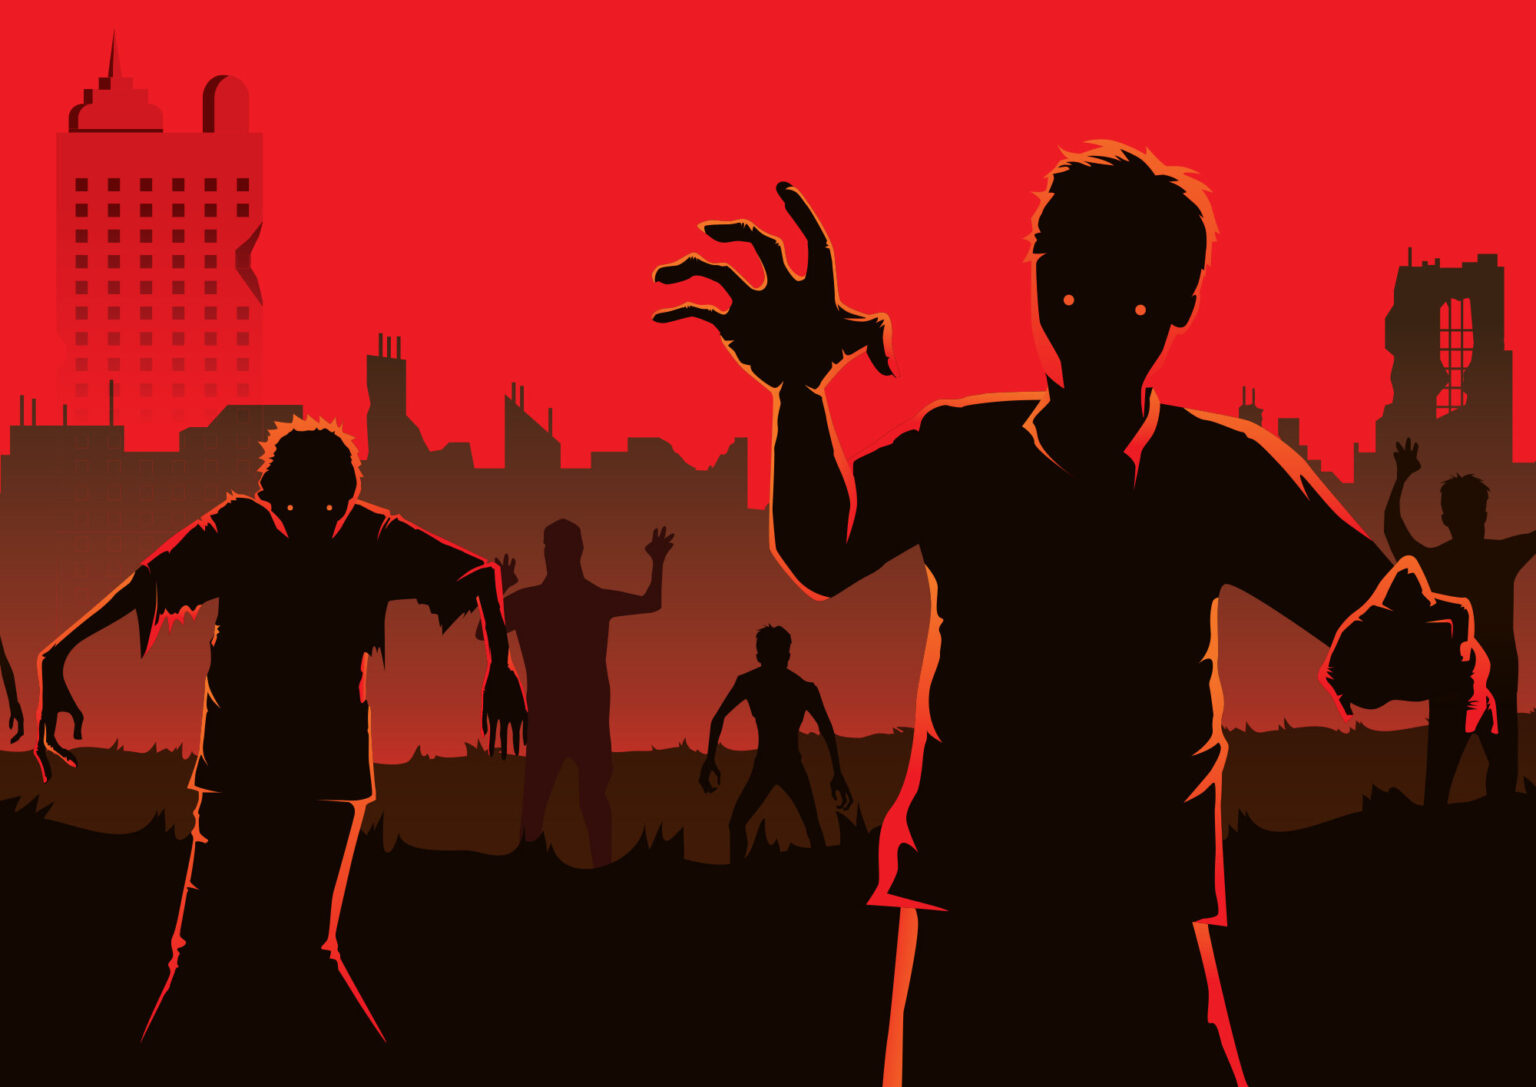 Are zombies the next wave of the coronavirus? Twitter has all the best memes about the CDC's zombie preparedness guide.